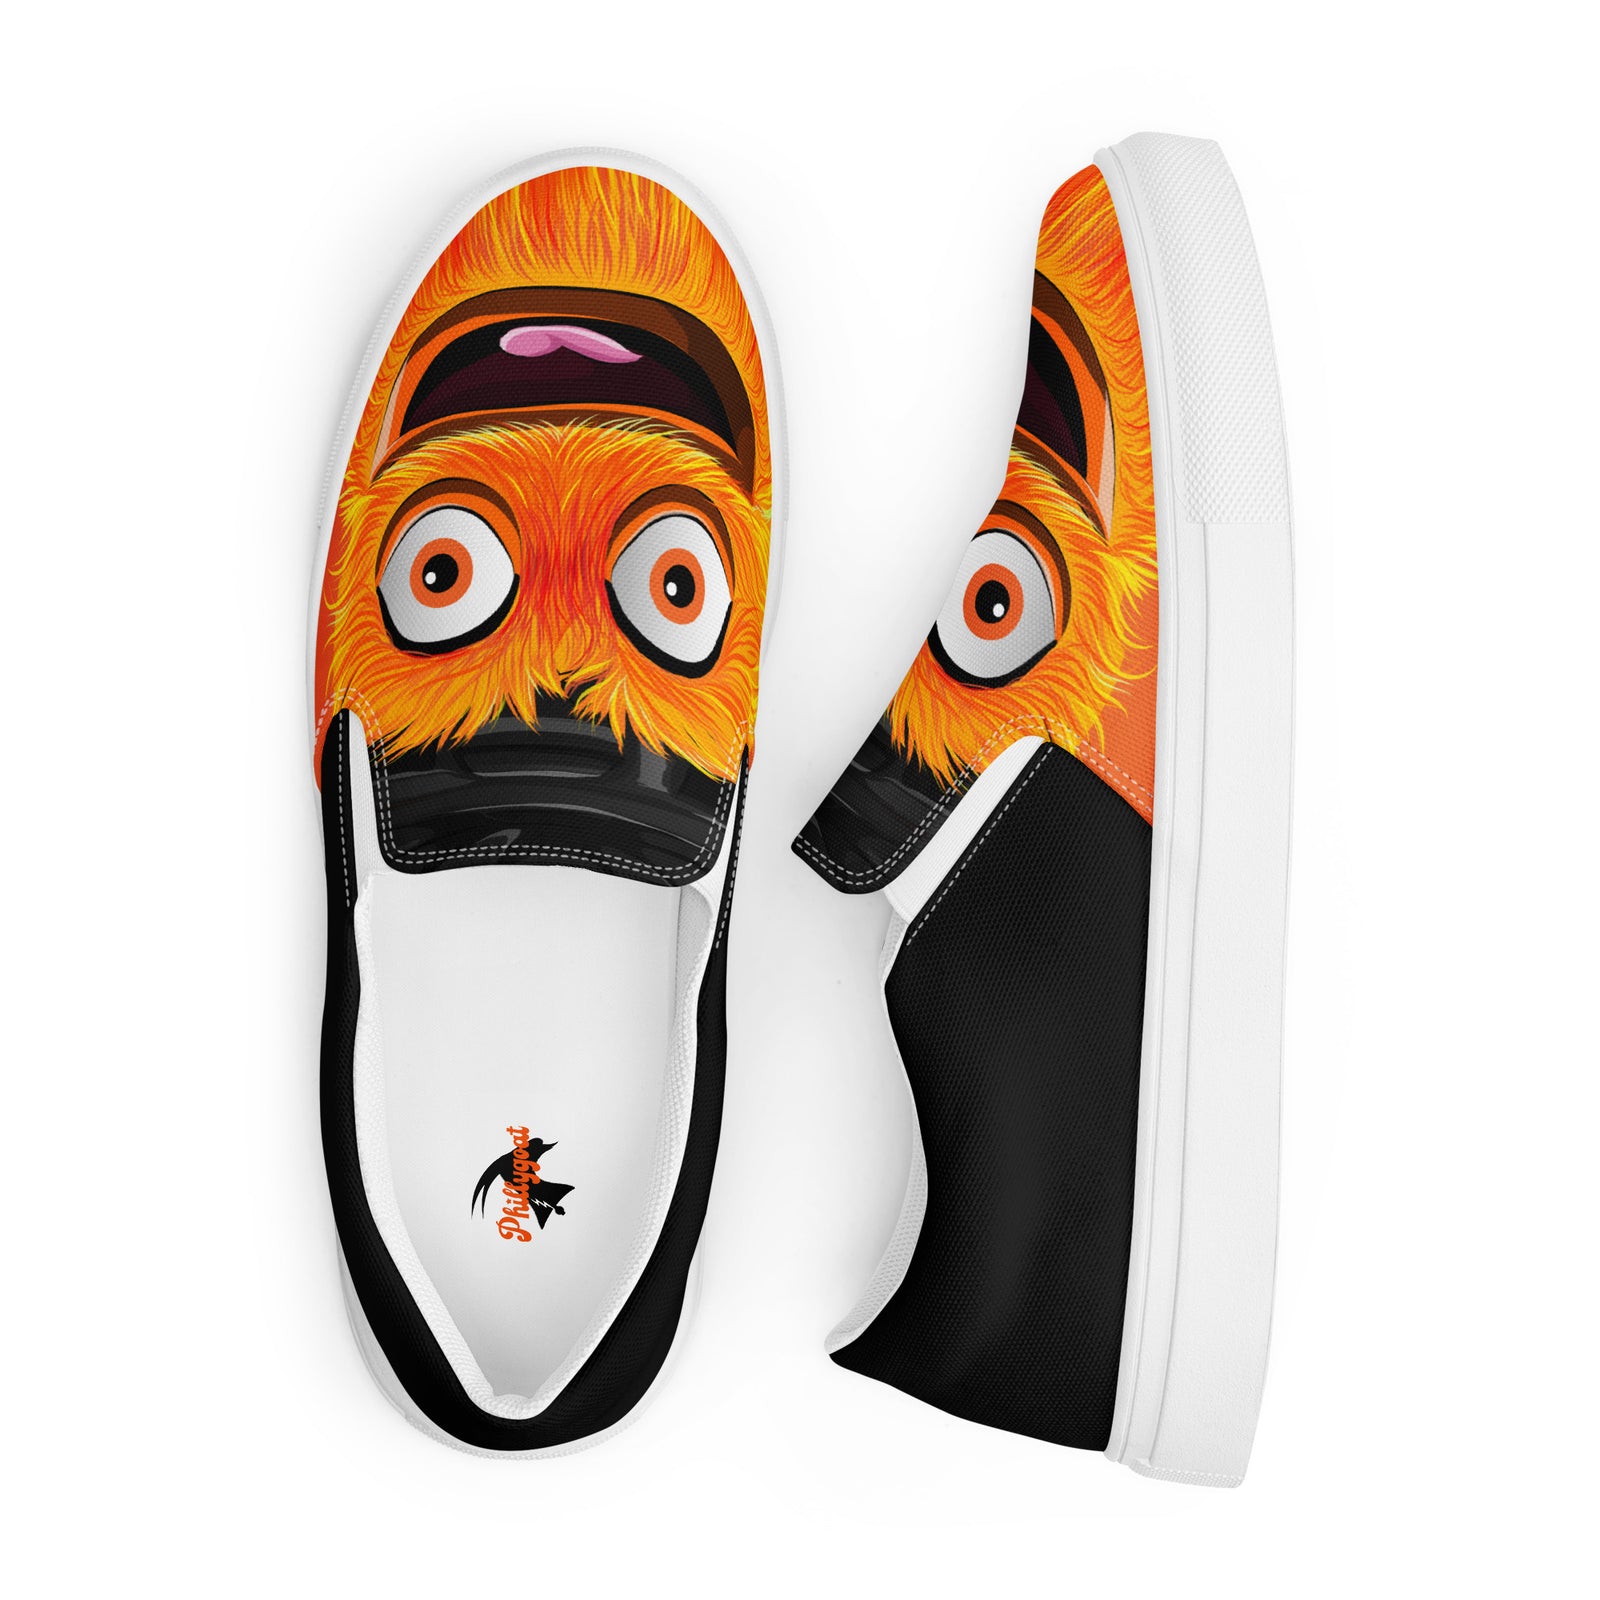 The "Ice Monsters" Women’s Slip-on Canvas Shoes